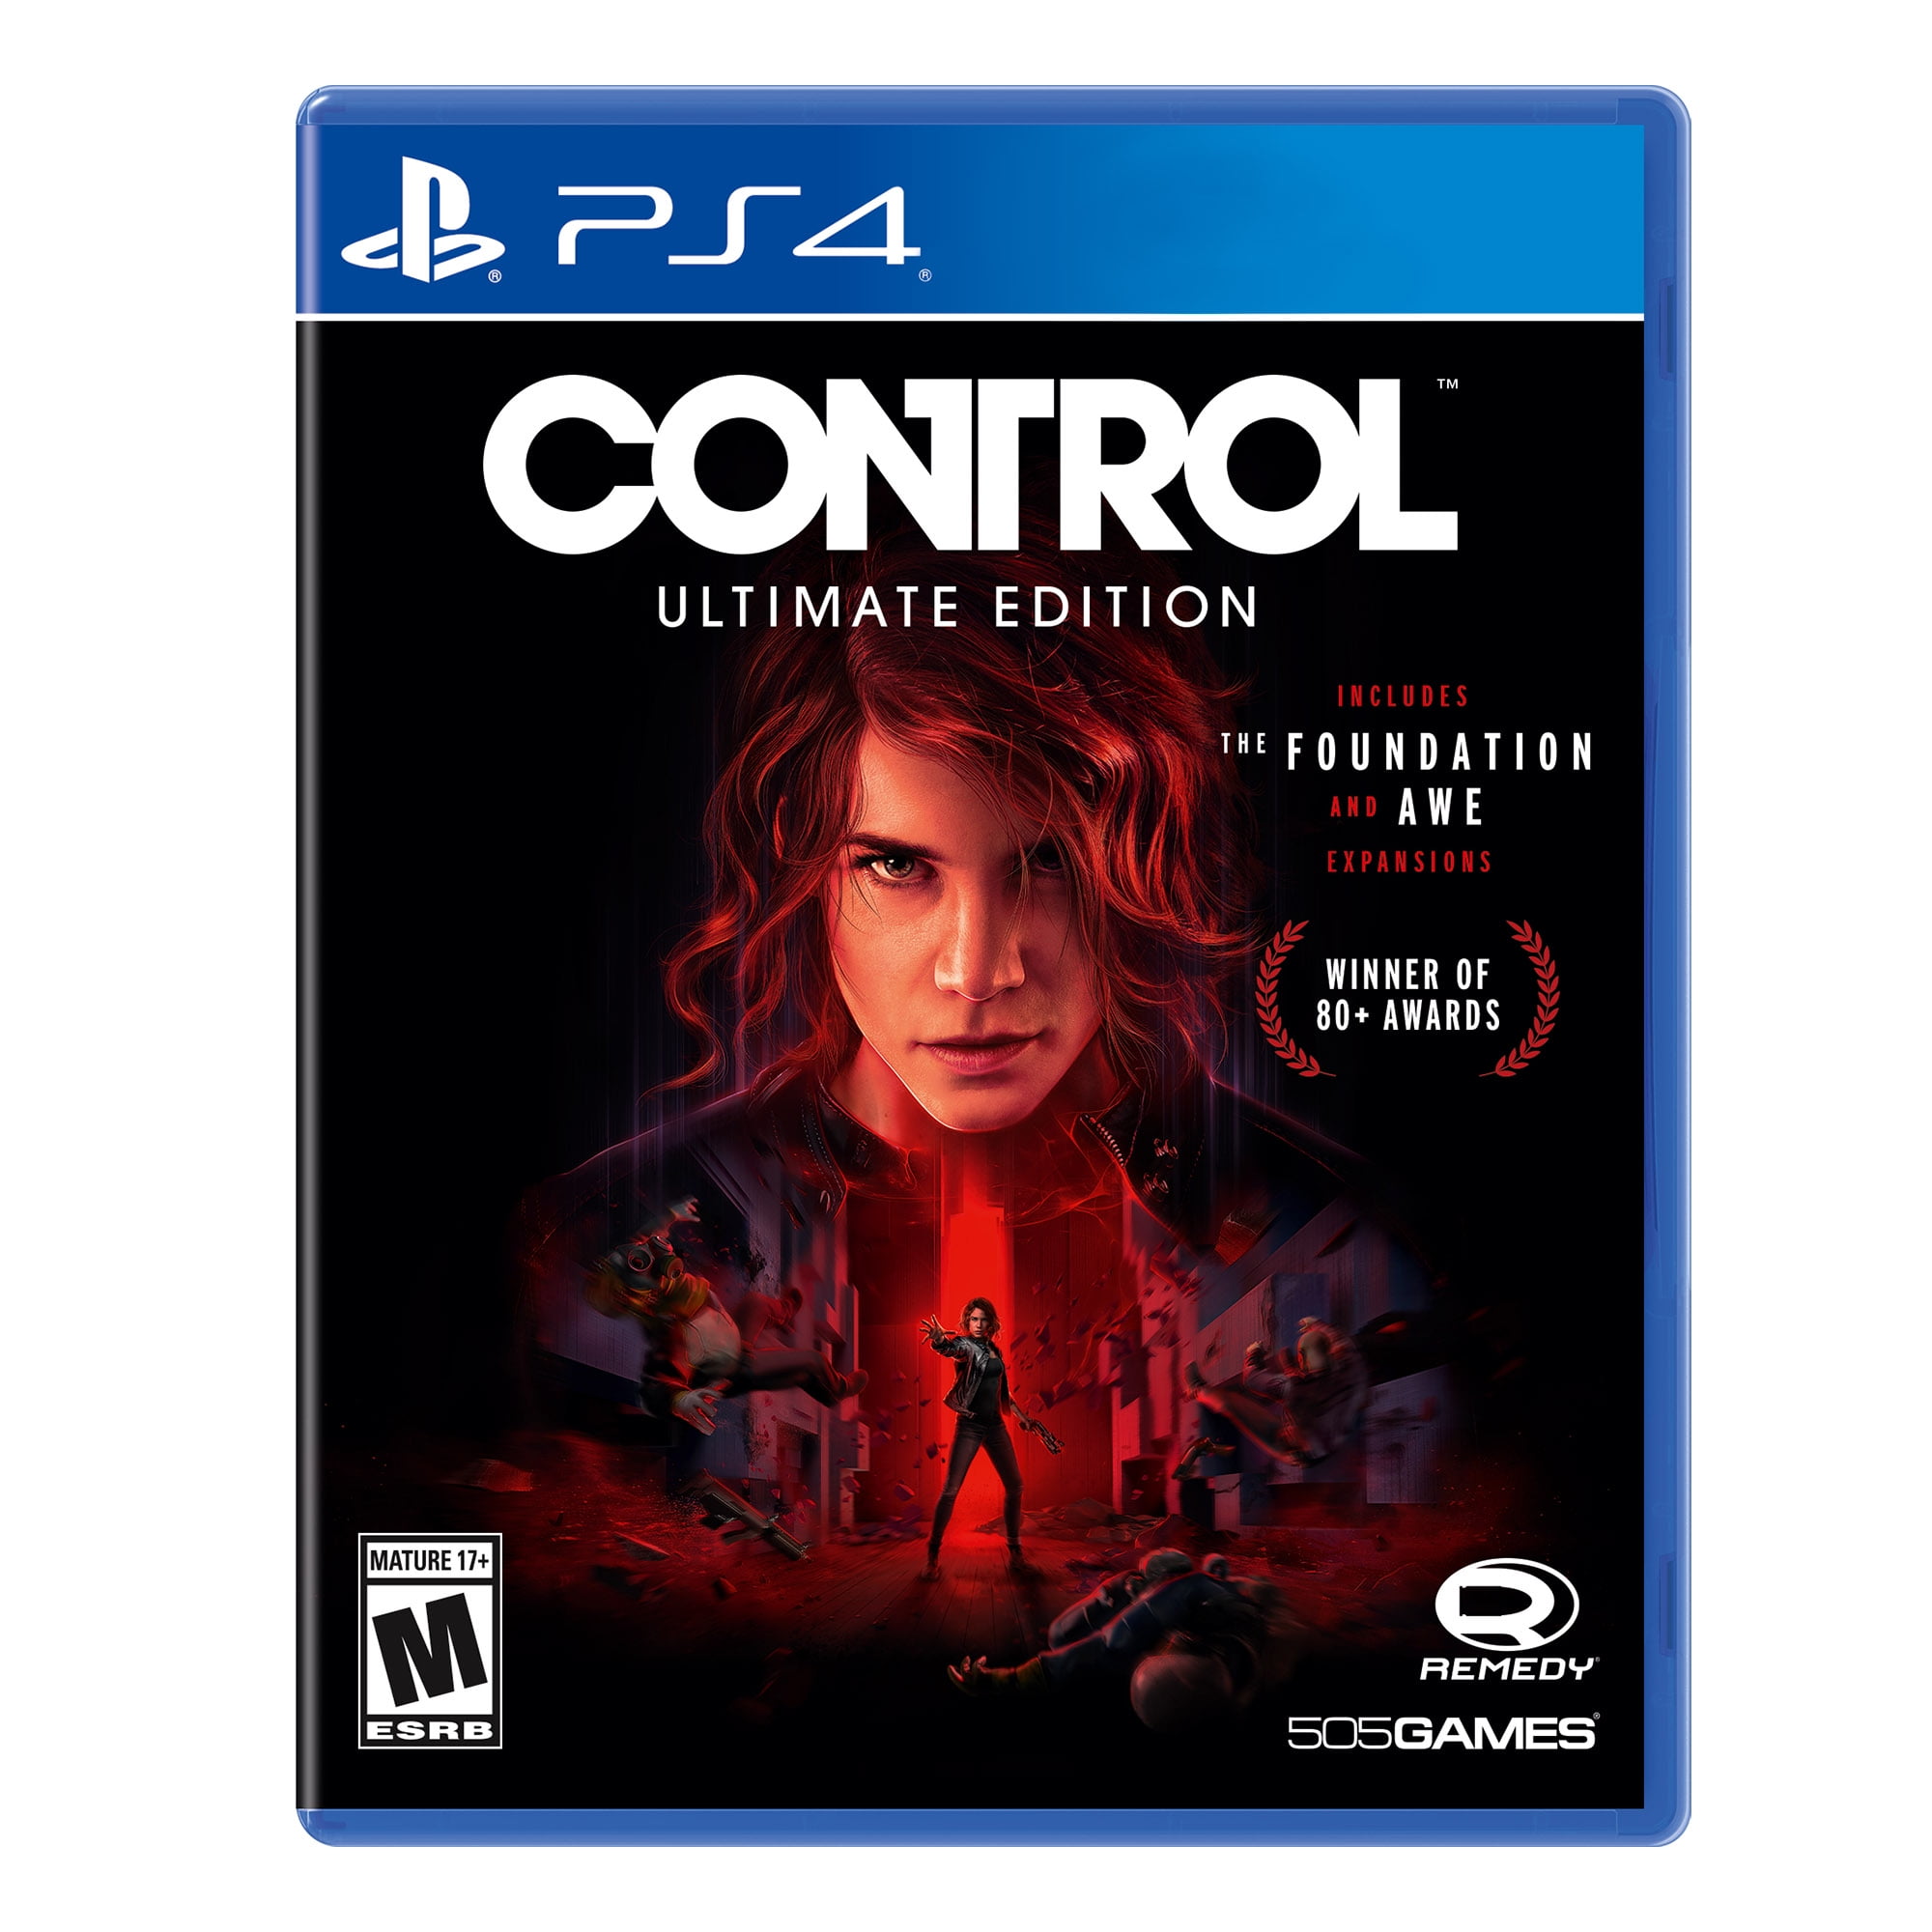 Control Wins Official PlayStation Magazine's Game of the Year 2019 :  r/controlgame